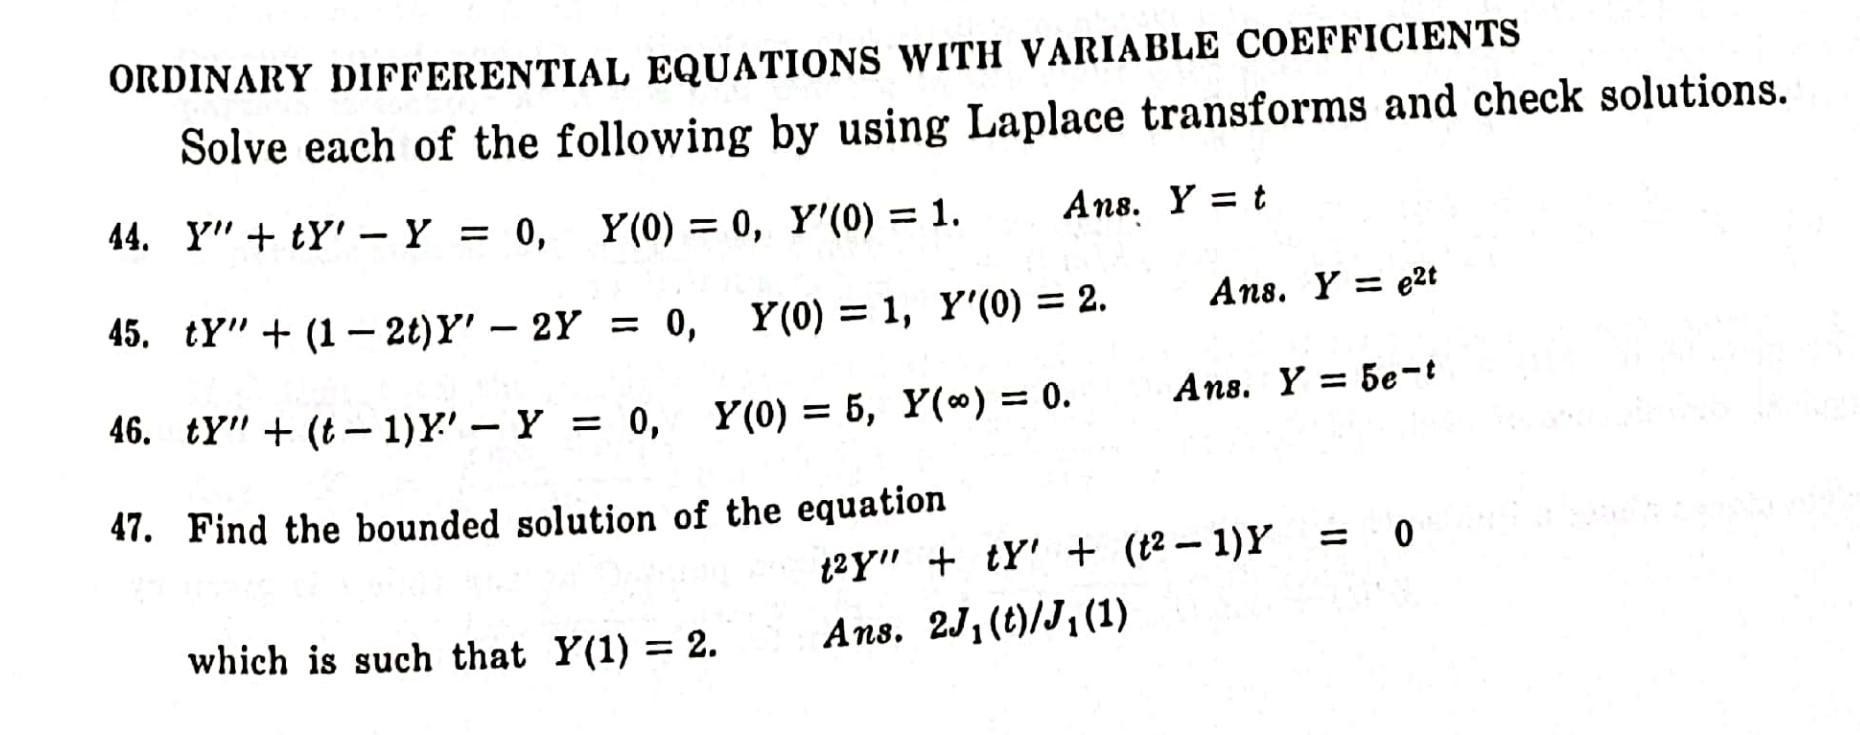 ORDINARY DIFFERENTIAL EQUATIONS WITH VARIABLE COEFFICIENTS Solve each of the following by using Laplace transforms and check